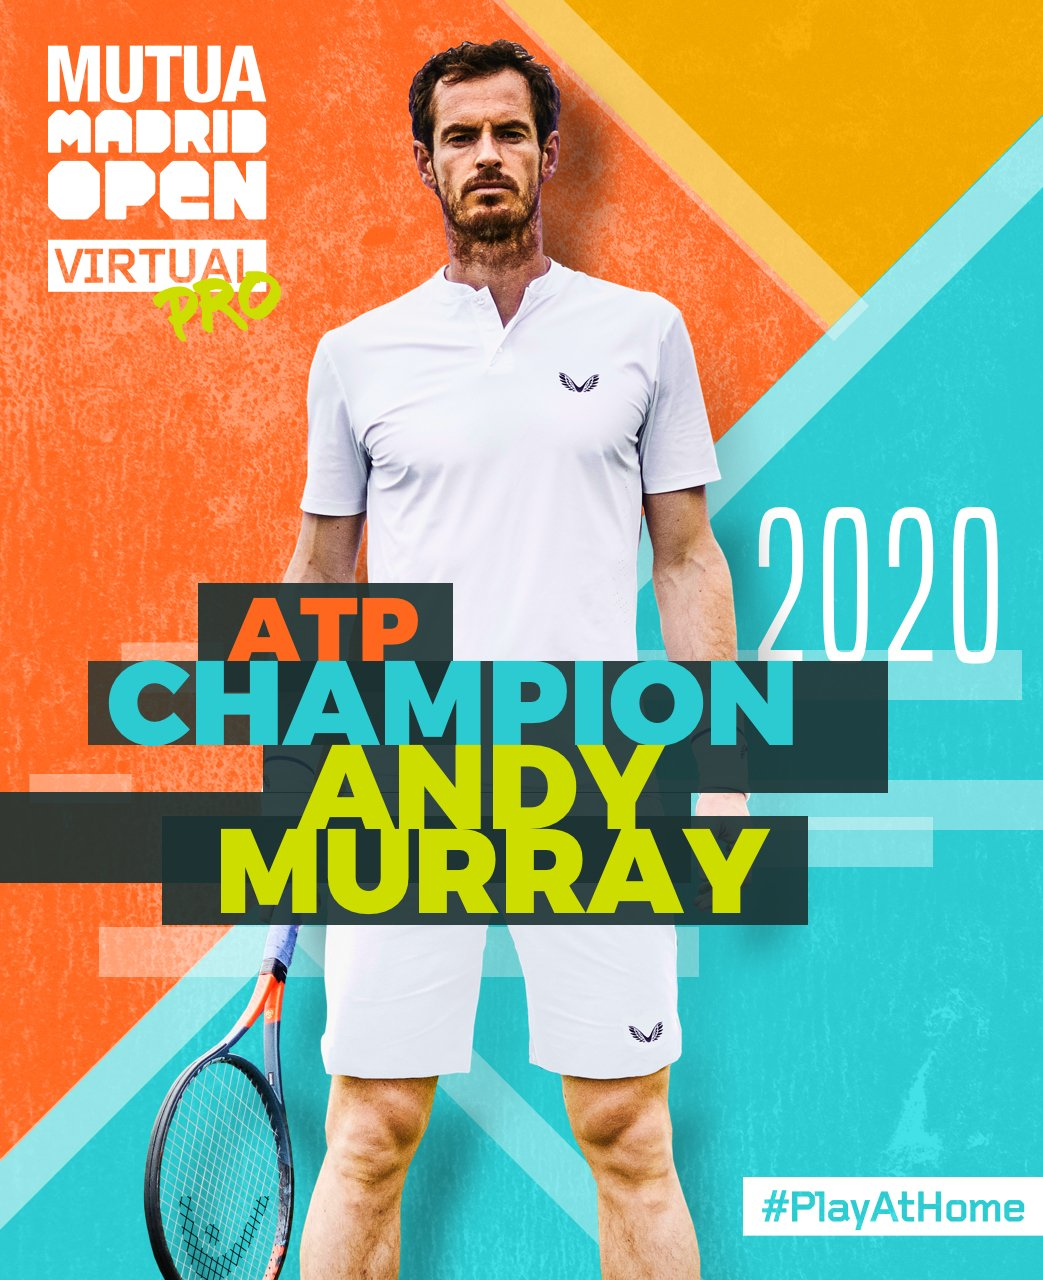 Bertens and Murray win virtual Mutua Madrid Open competitions